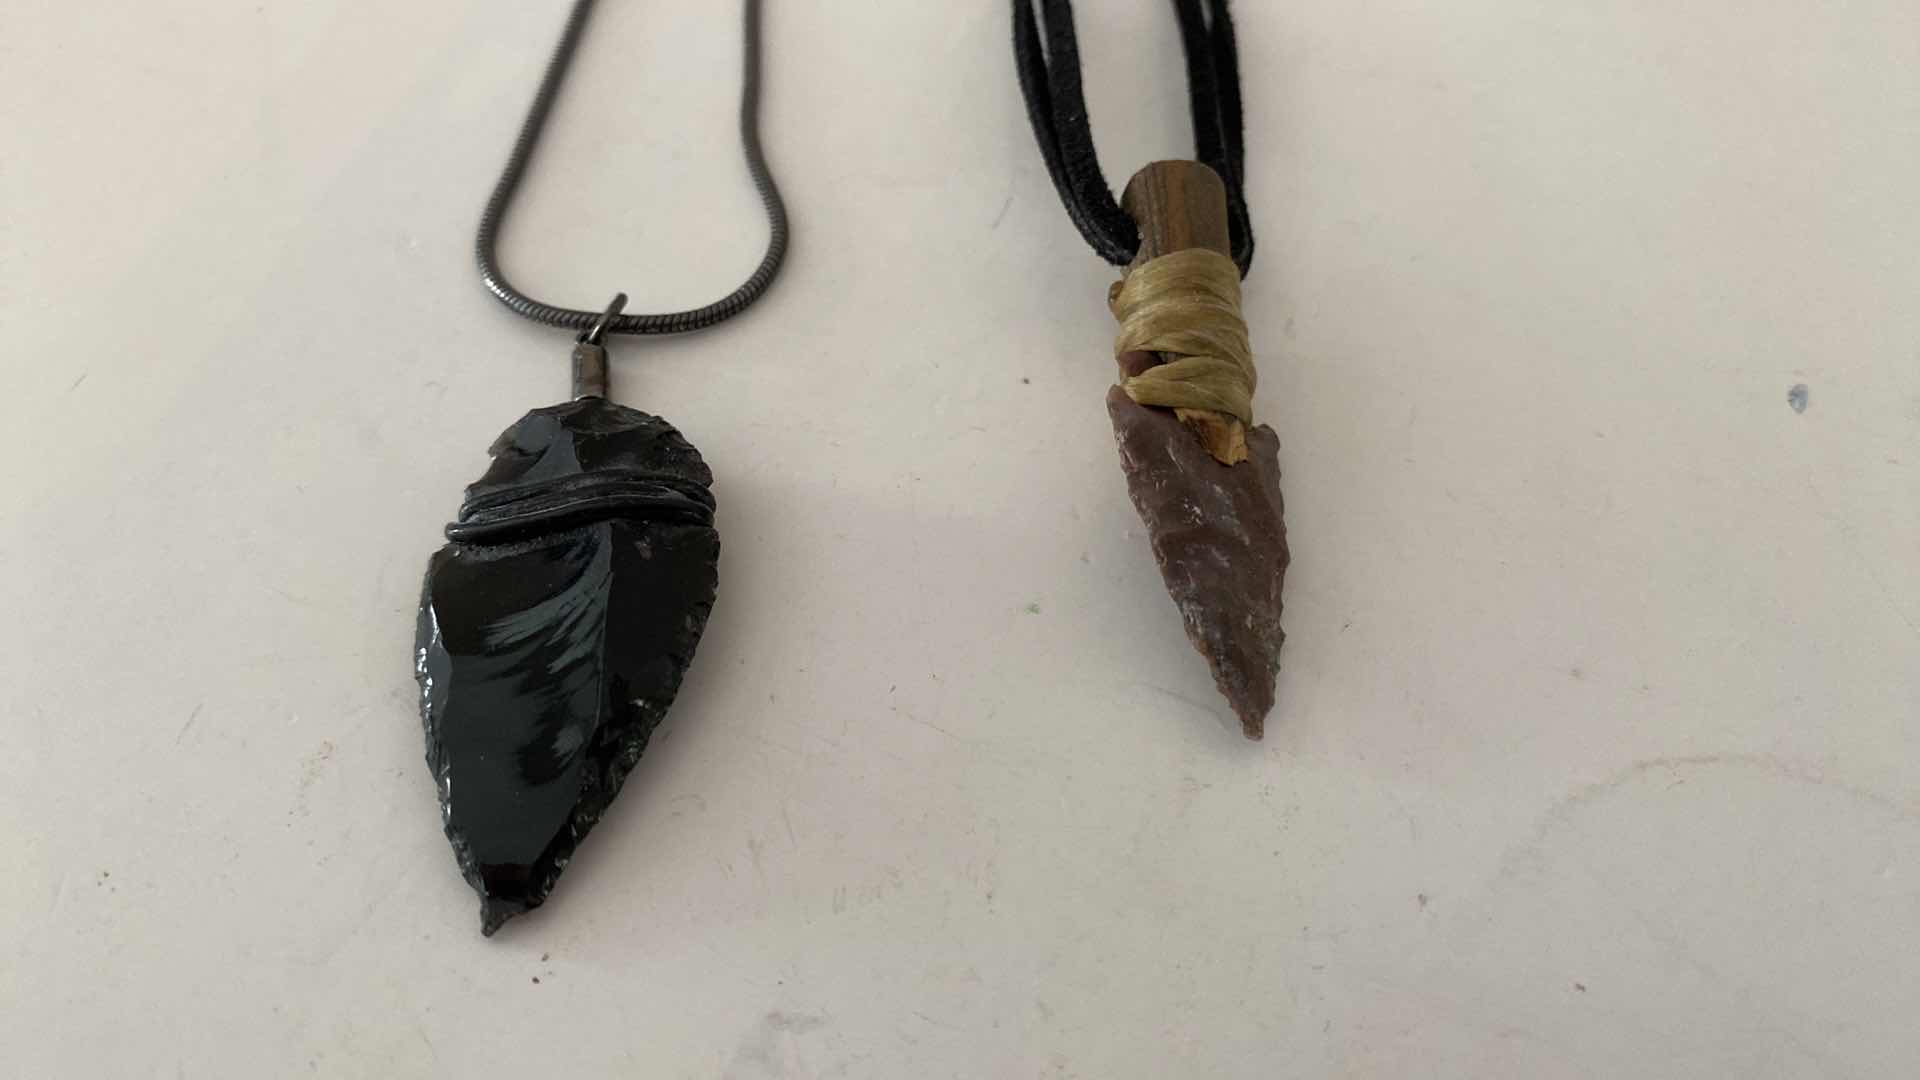 Photo 4 of POLISHED BLACK STONE AND ARROWHEAD NECKLACES 13.5”